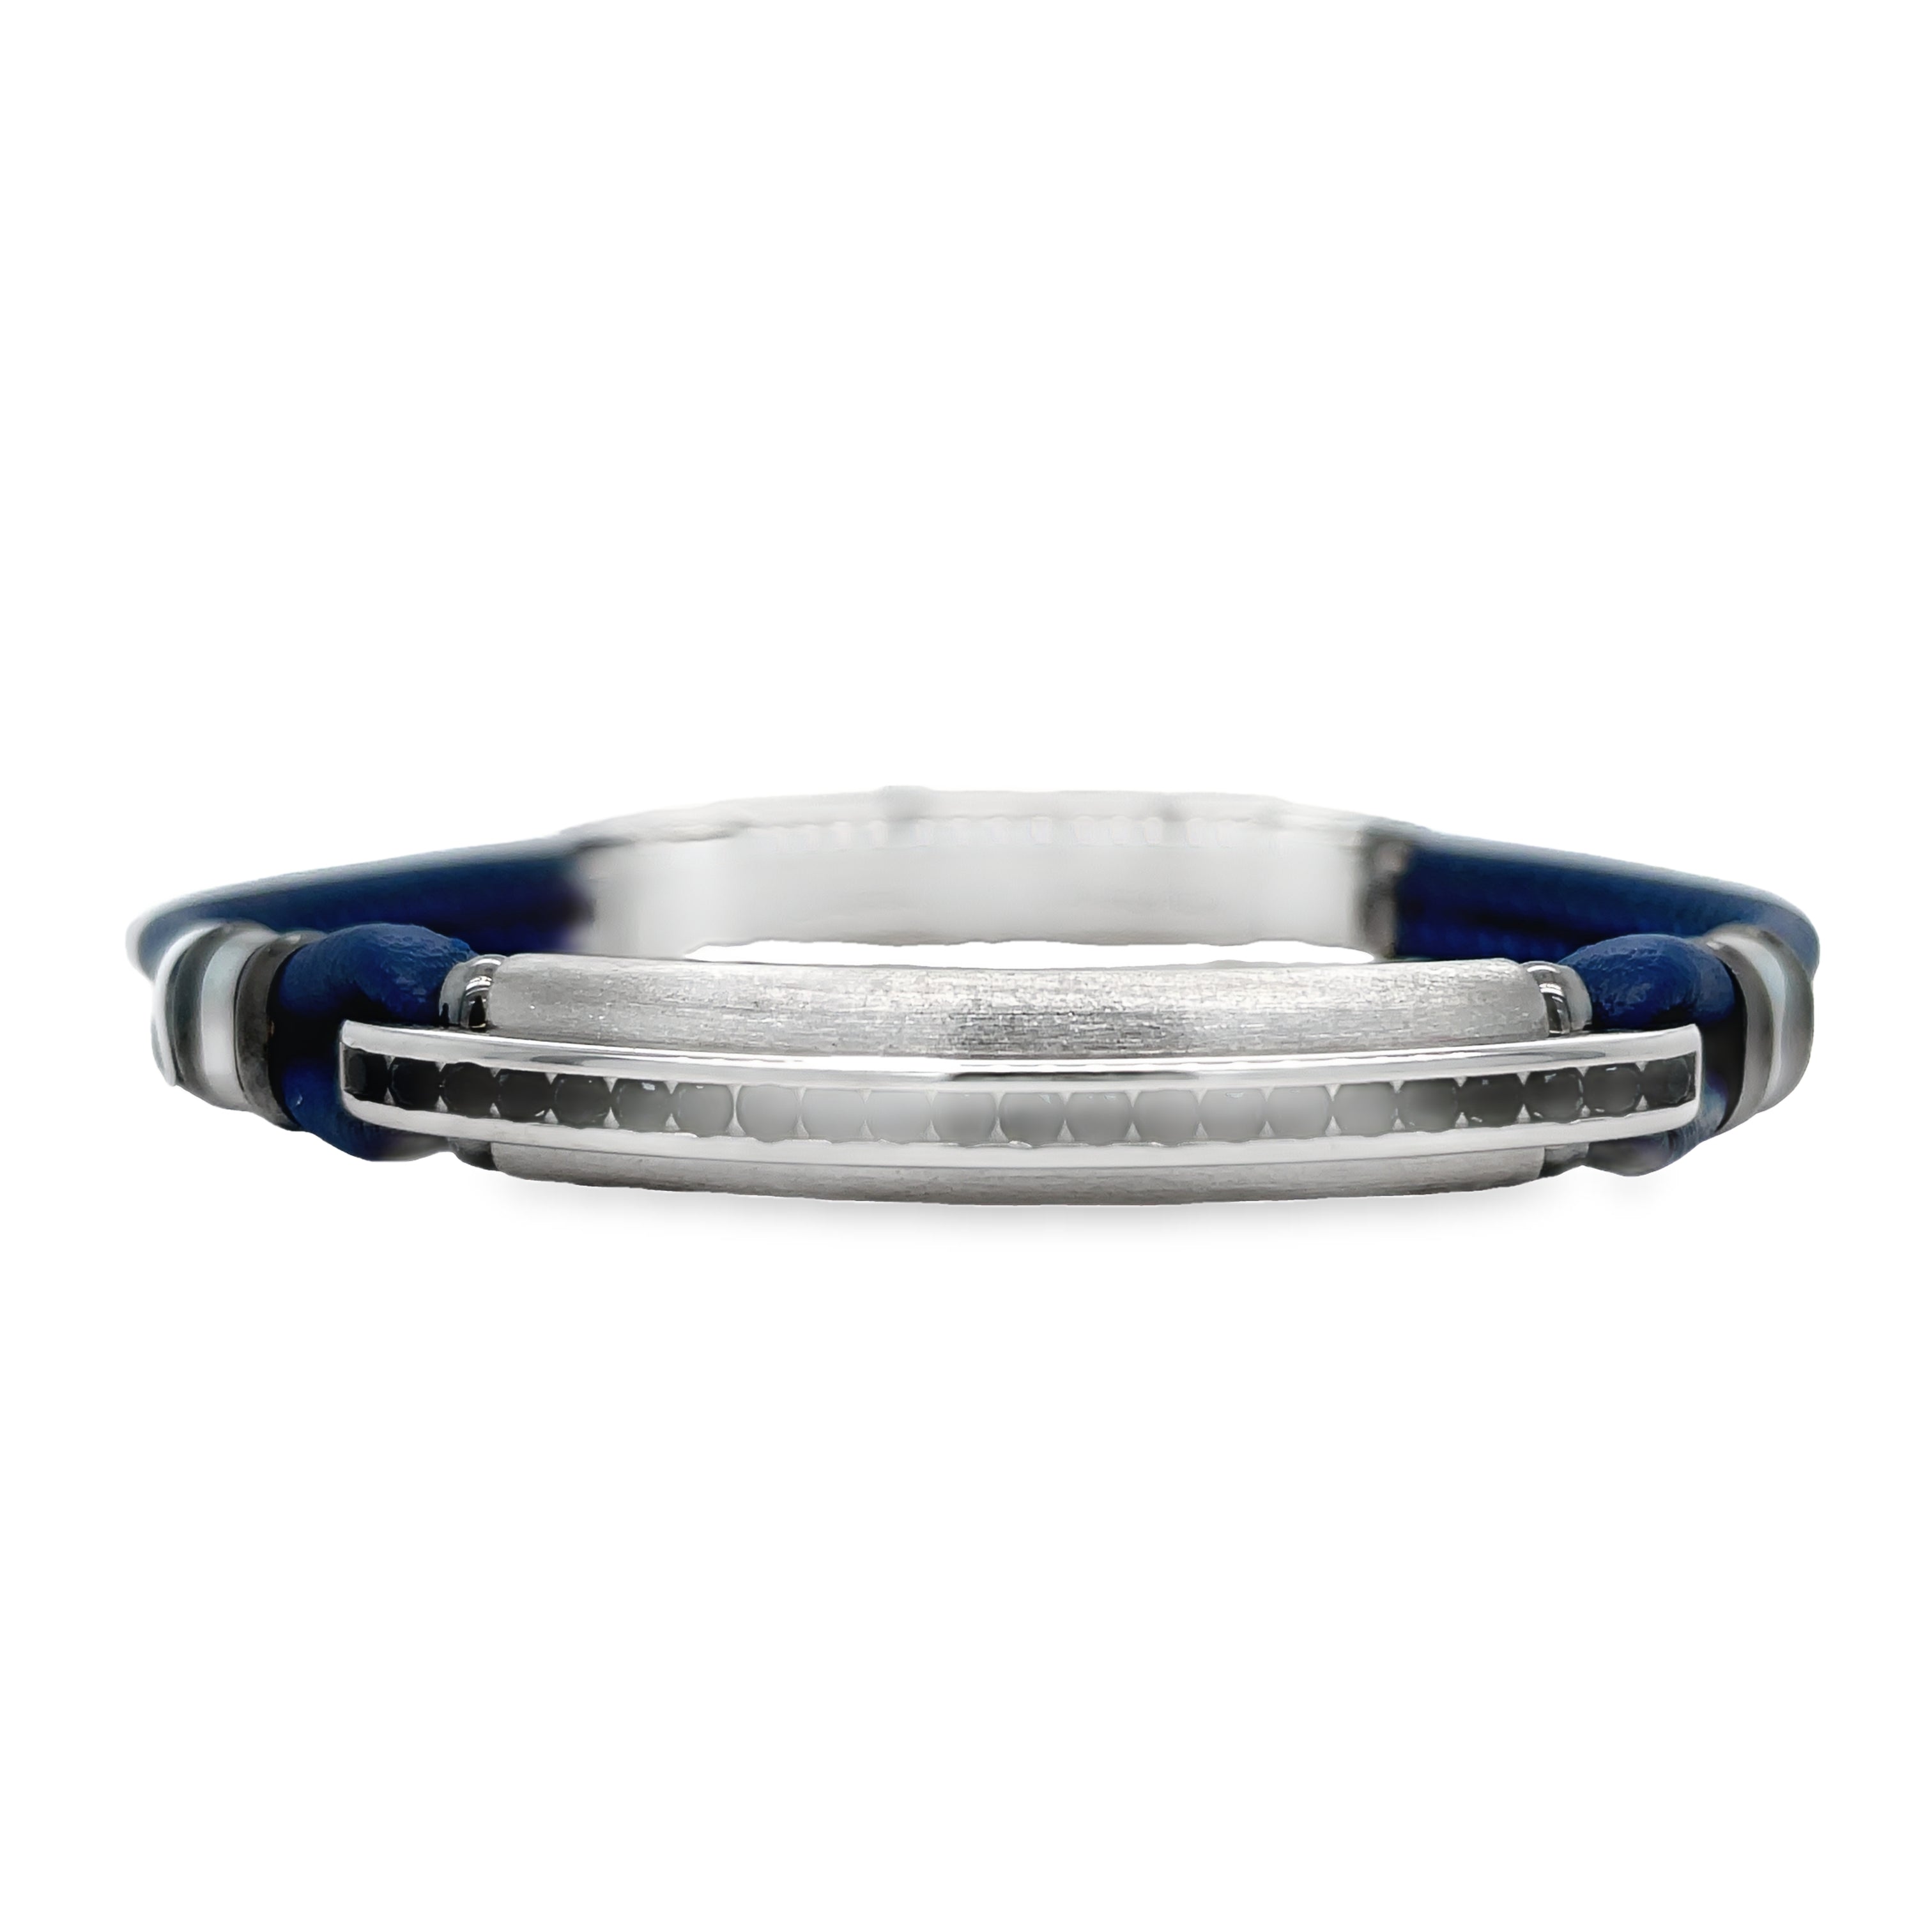 This Italian made Zancan bracelet features a blue leather band adorned with sparkling round spinel gems. Made of sterling silver, it offers an adjustable clasp for a perfect fit. Add a touch of elegance and sophistication to any outfit with this stunning piece.